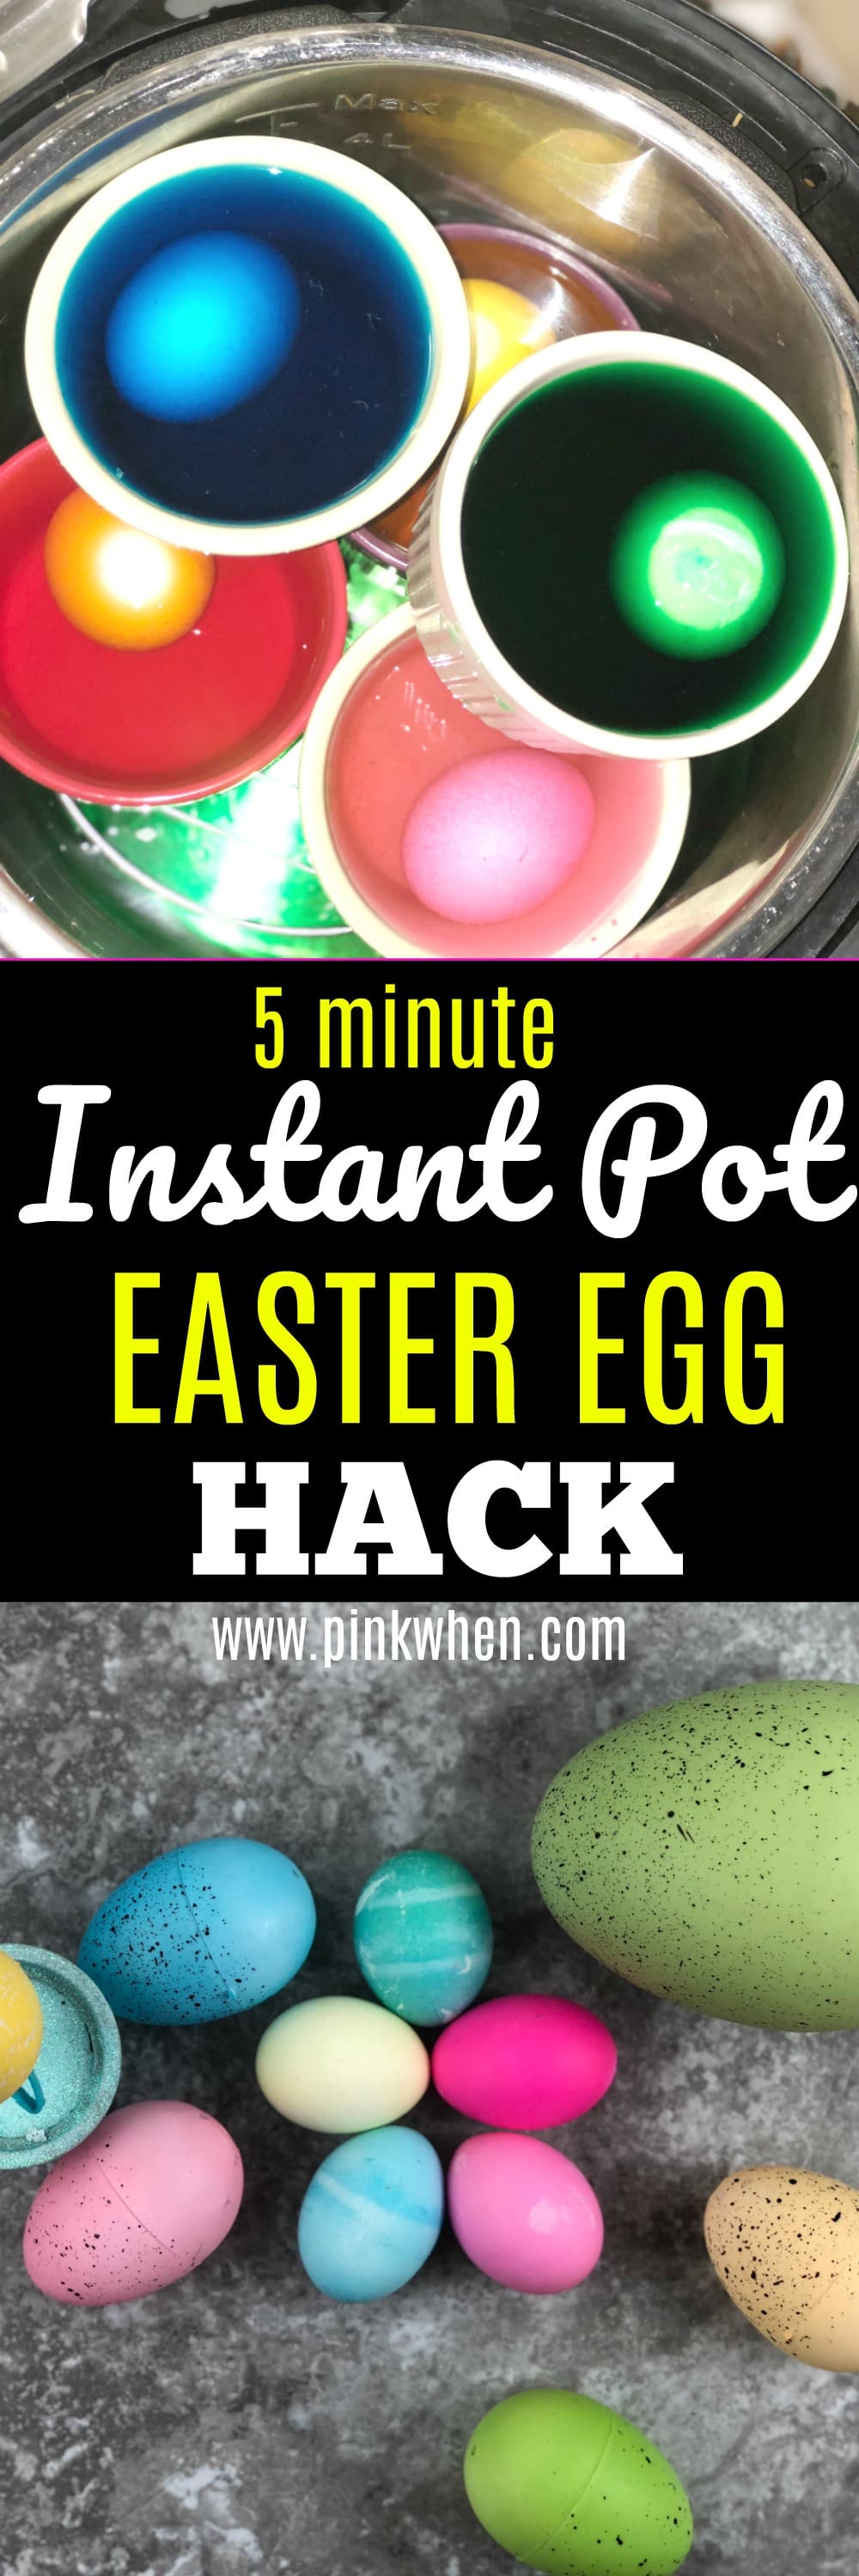 Another great way to use your instant Pot is with this Easy Instant Pot Easter Egg Recipe! In just five minutes you will have bright, beautiful Easter Eggs!